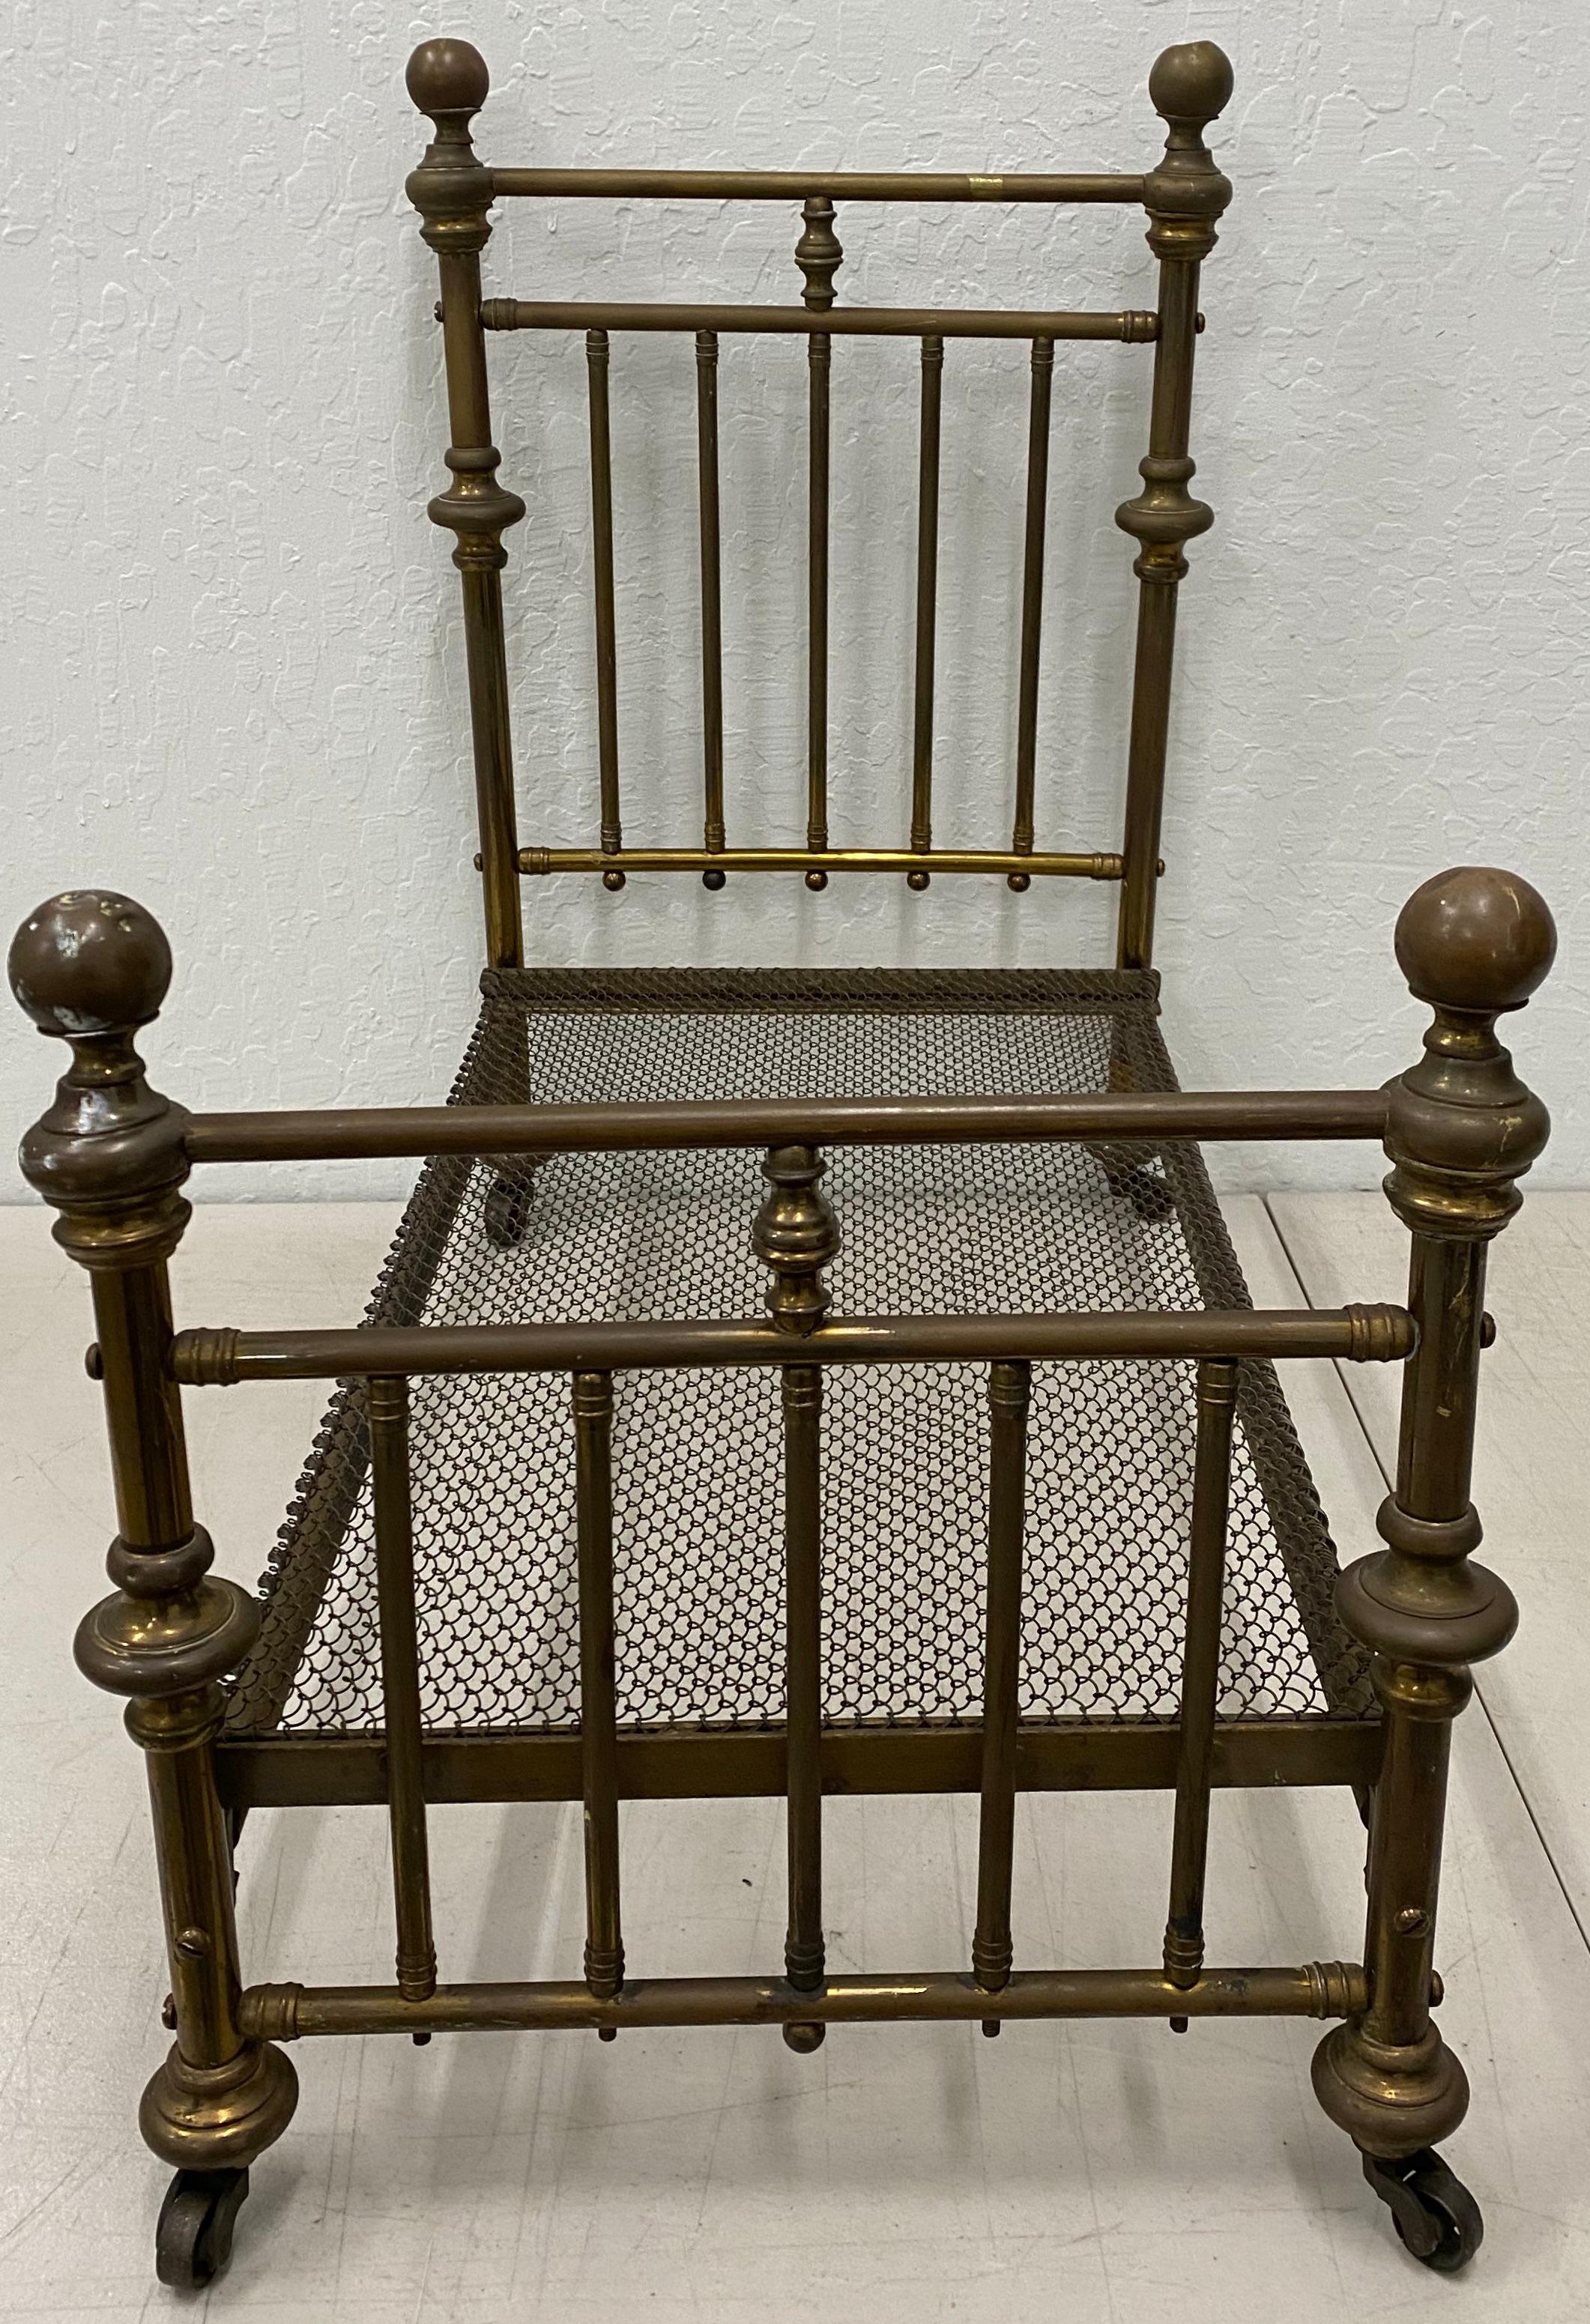 Antique brass doll bed

Antique doll bed

A great find for your doll or teddy bear!

Dimensions 27